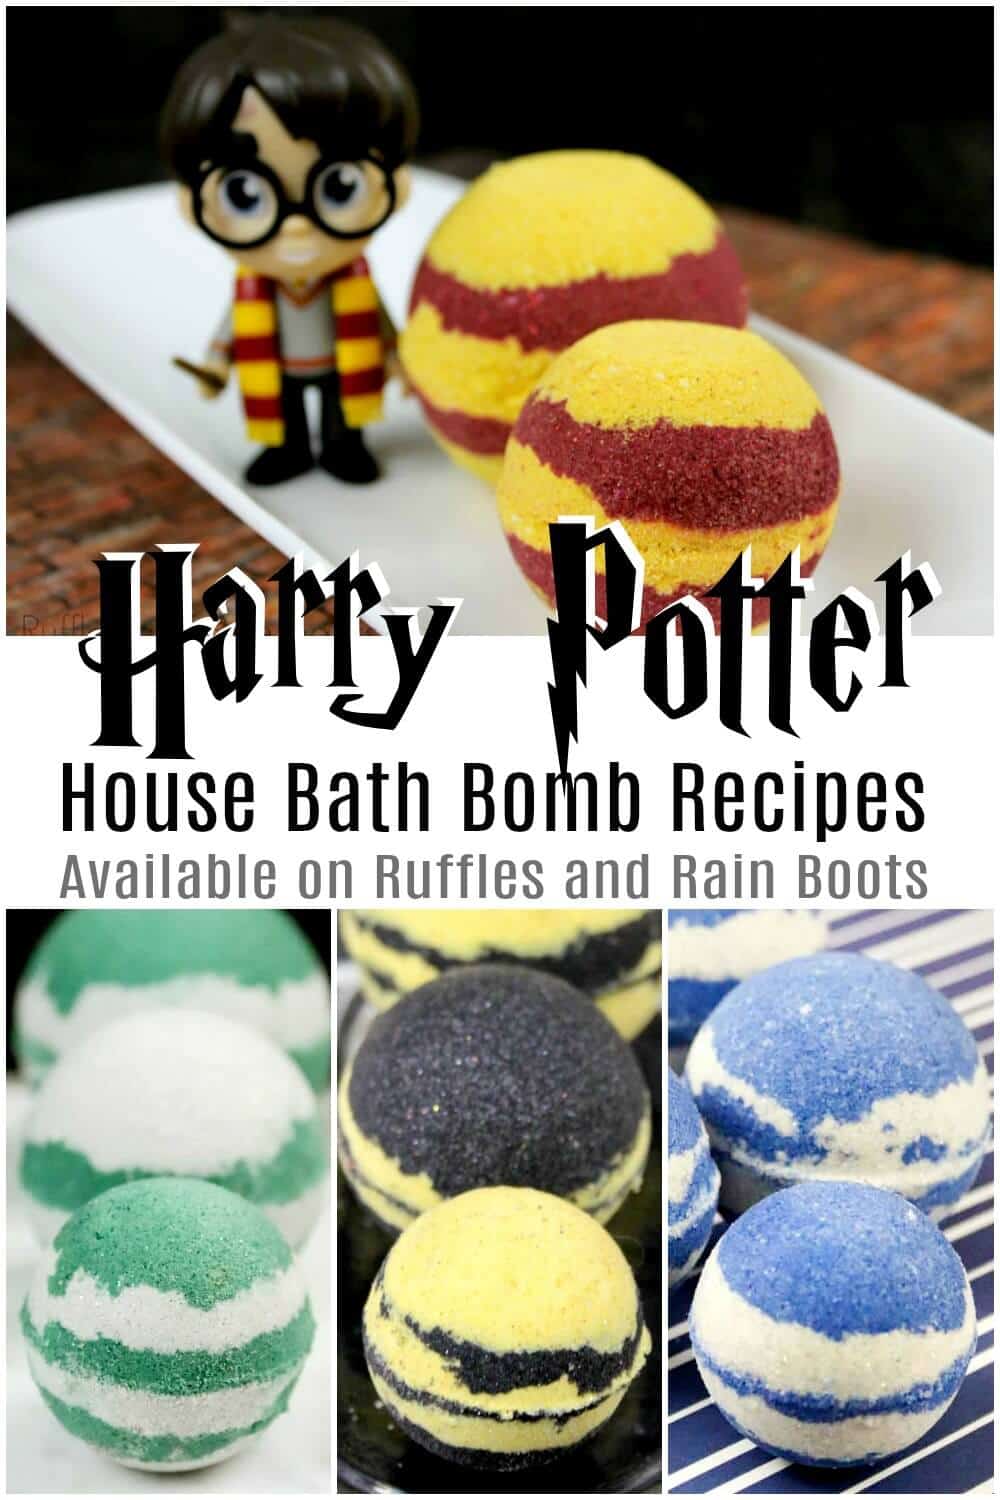 harry potter bath bombs gift idea photo collage with thext which reads harry potter house bath bomb recipes